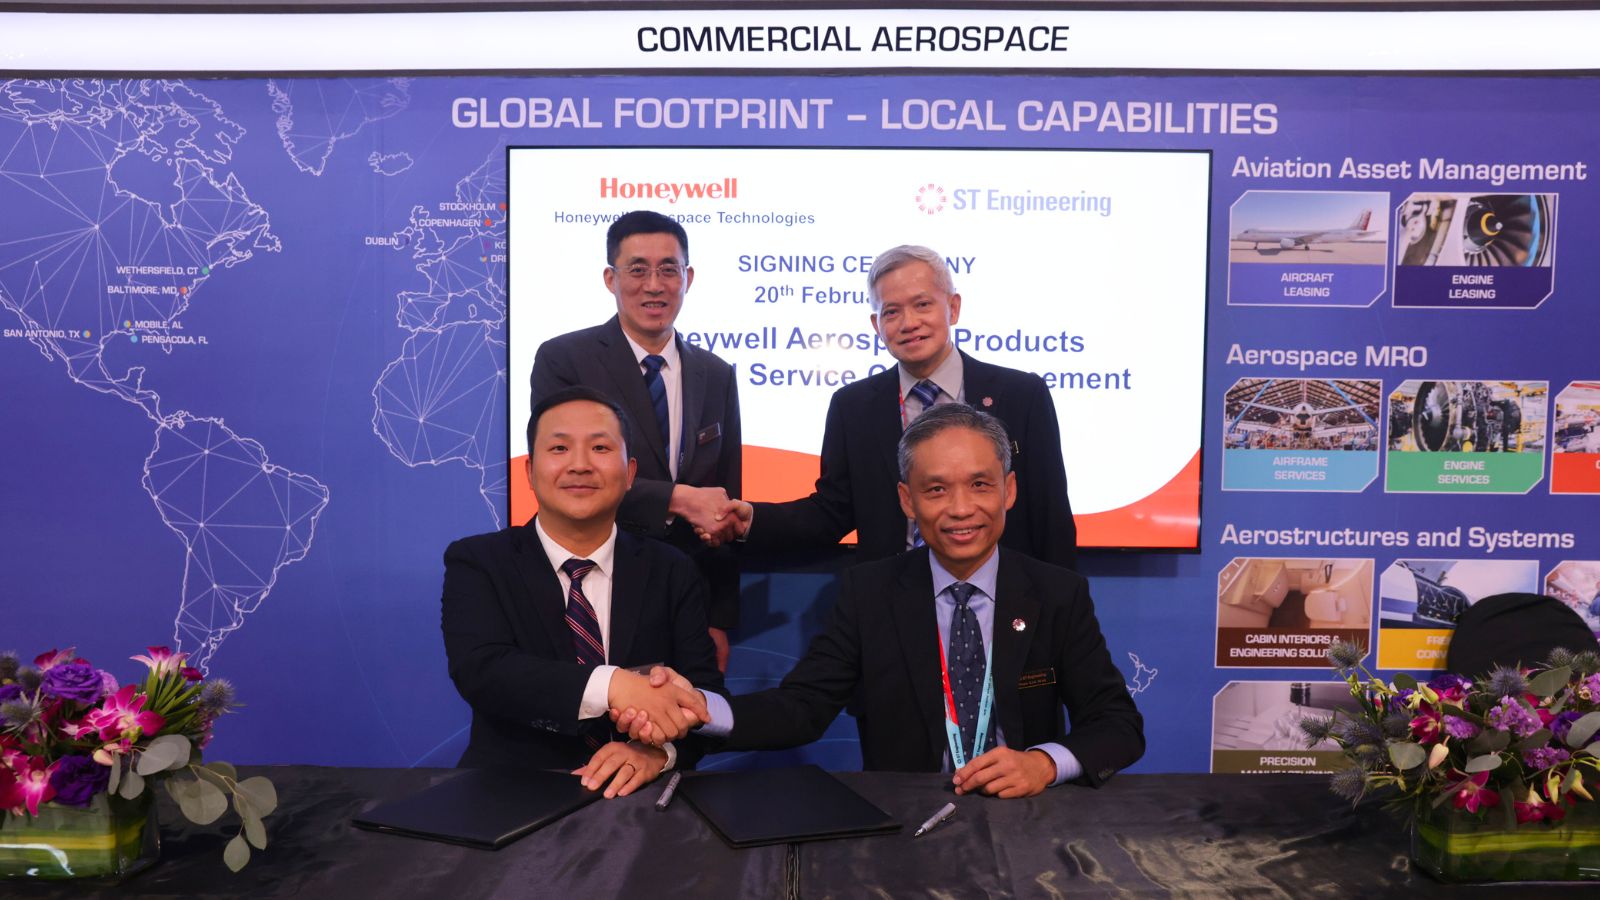 Extending Partnership with Honeywell for Components Service and Repair